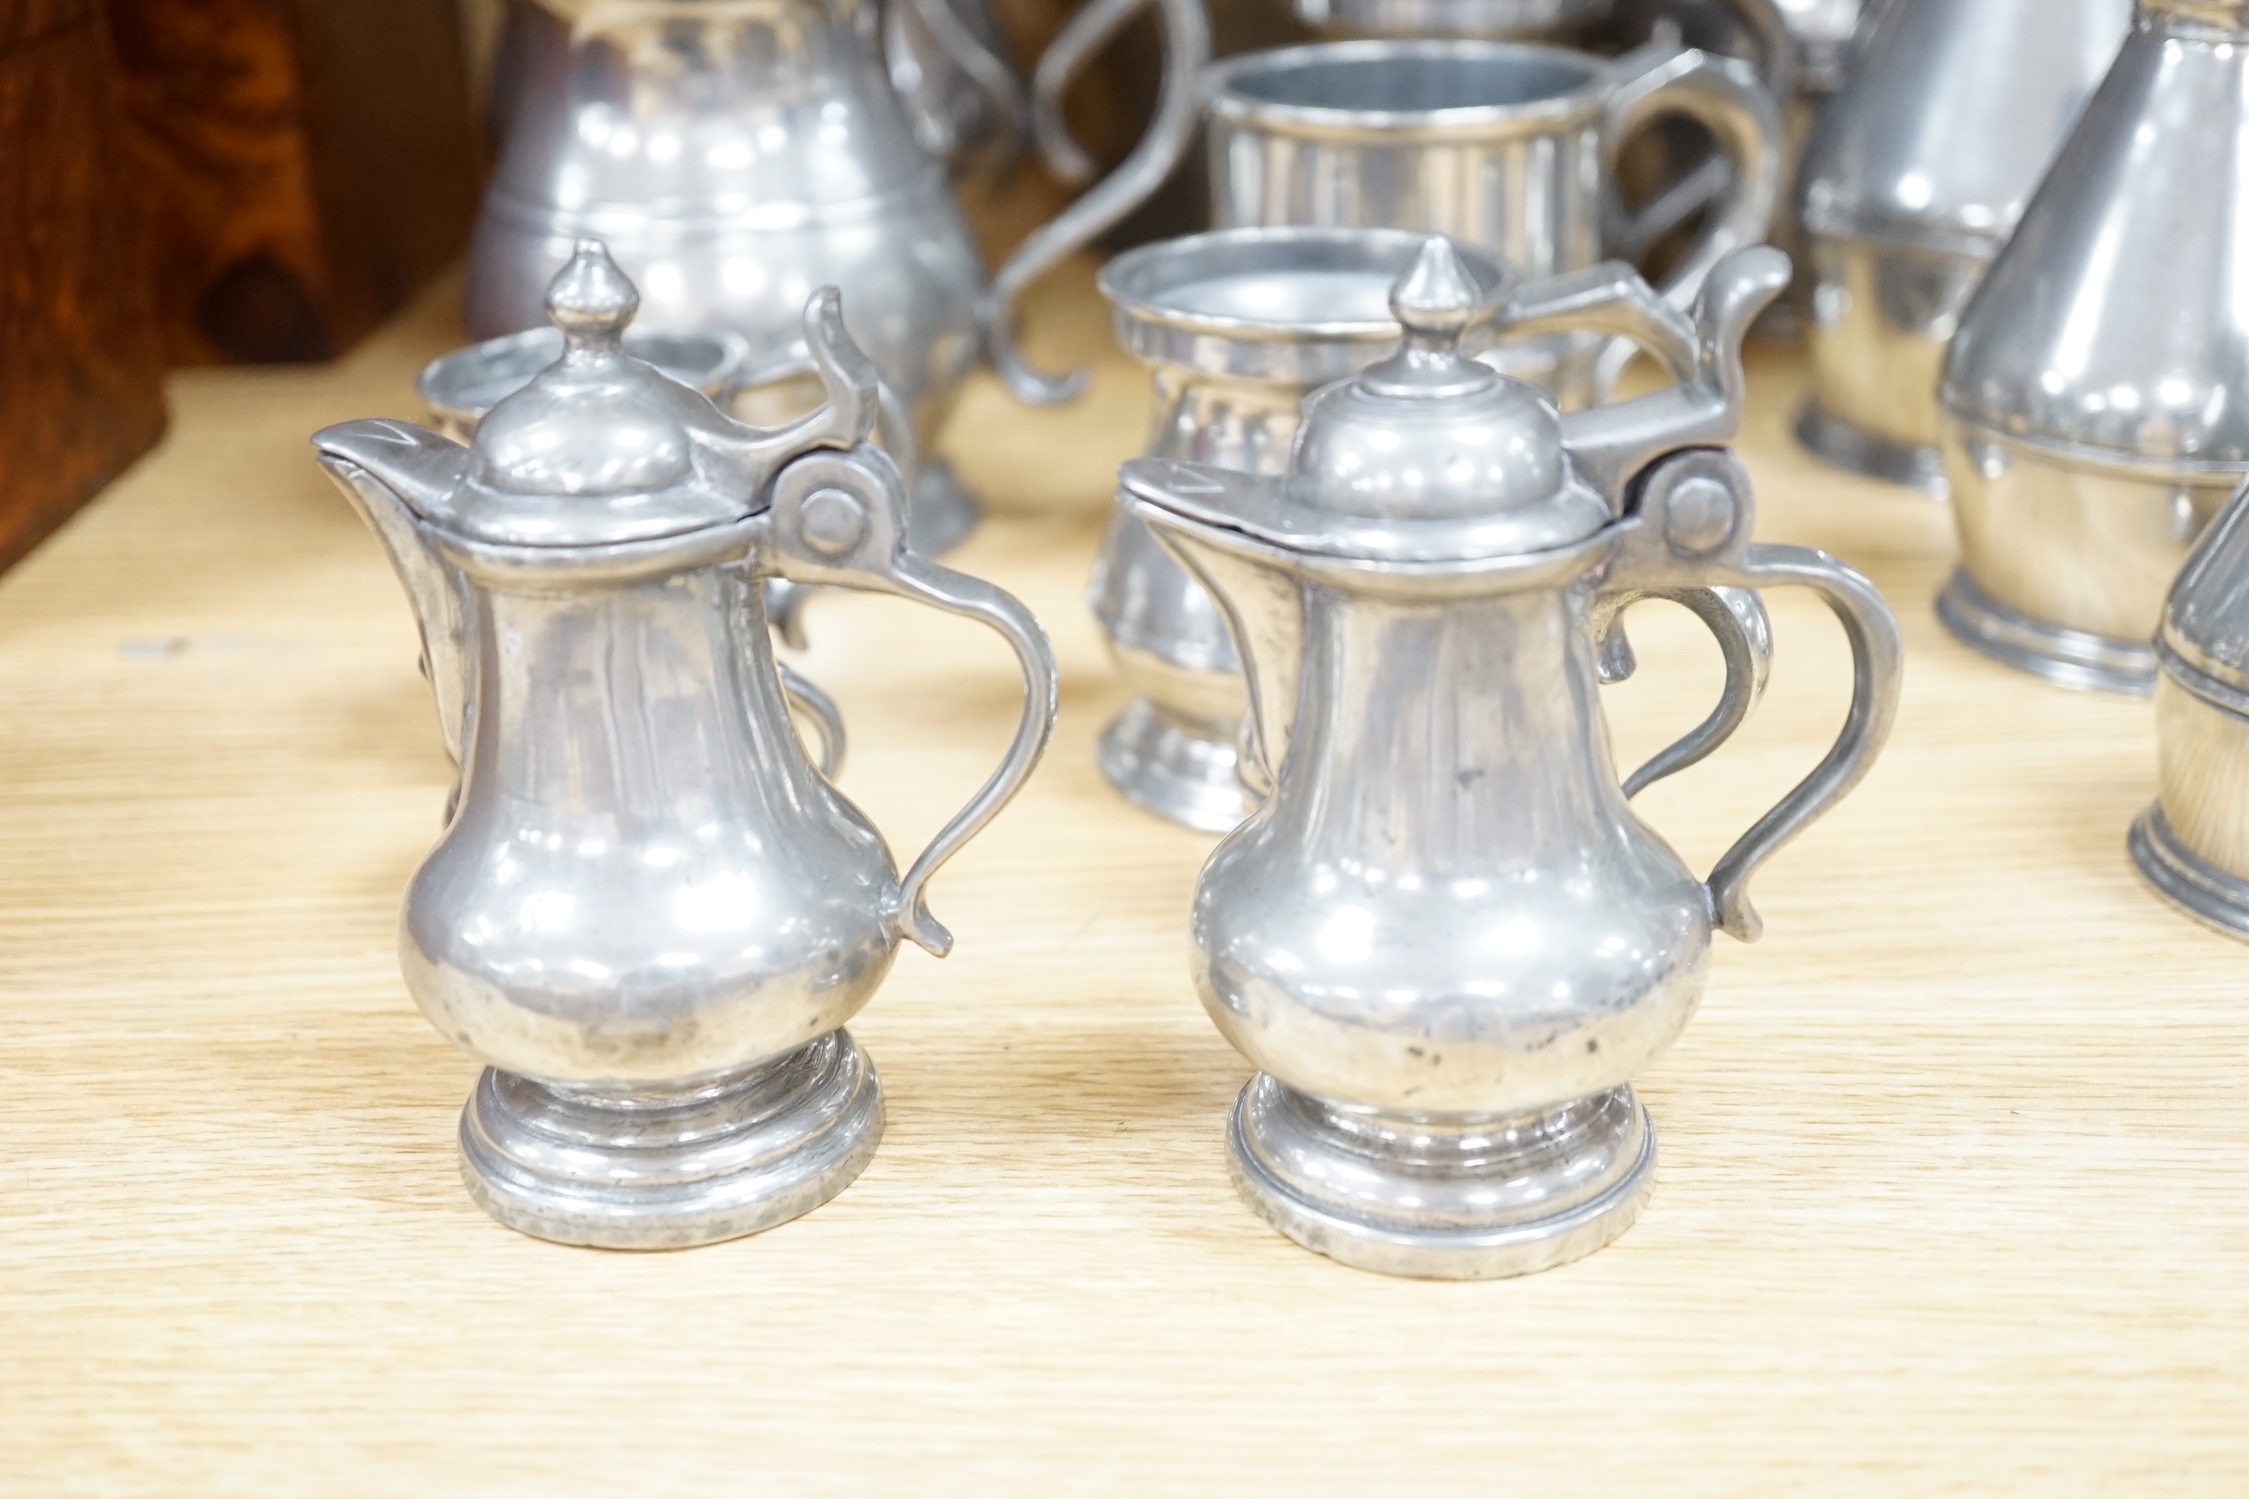 A collection of 19th/20th century pewter jugs, mugs and flagons (15), large jug 20cm high - Image 2 of 5